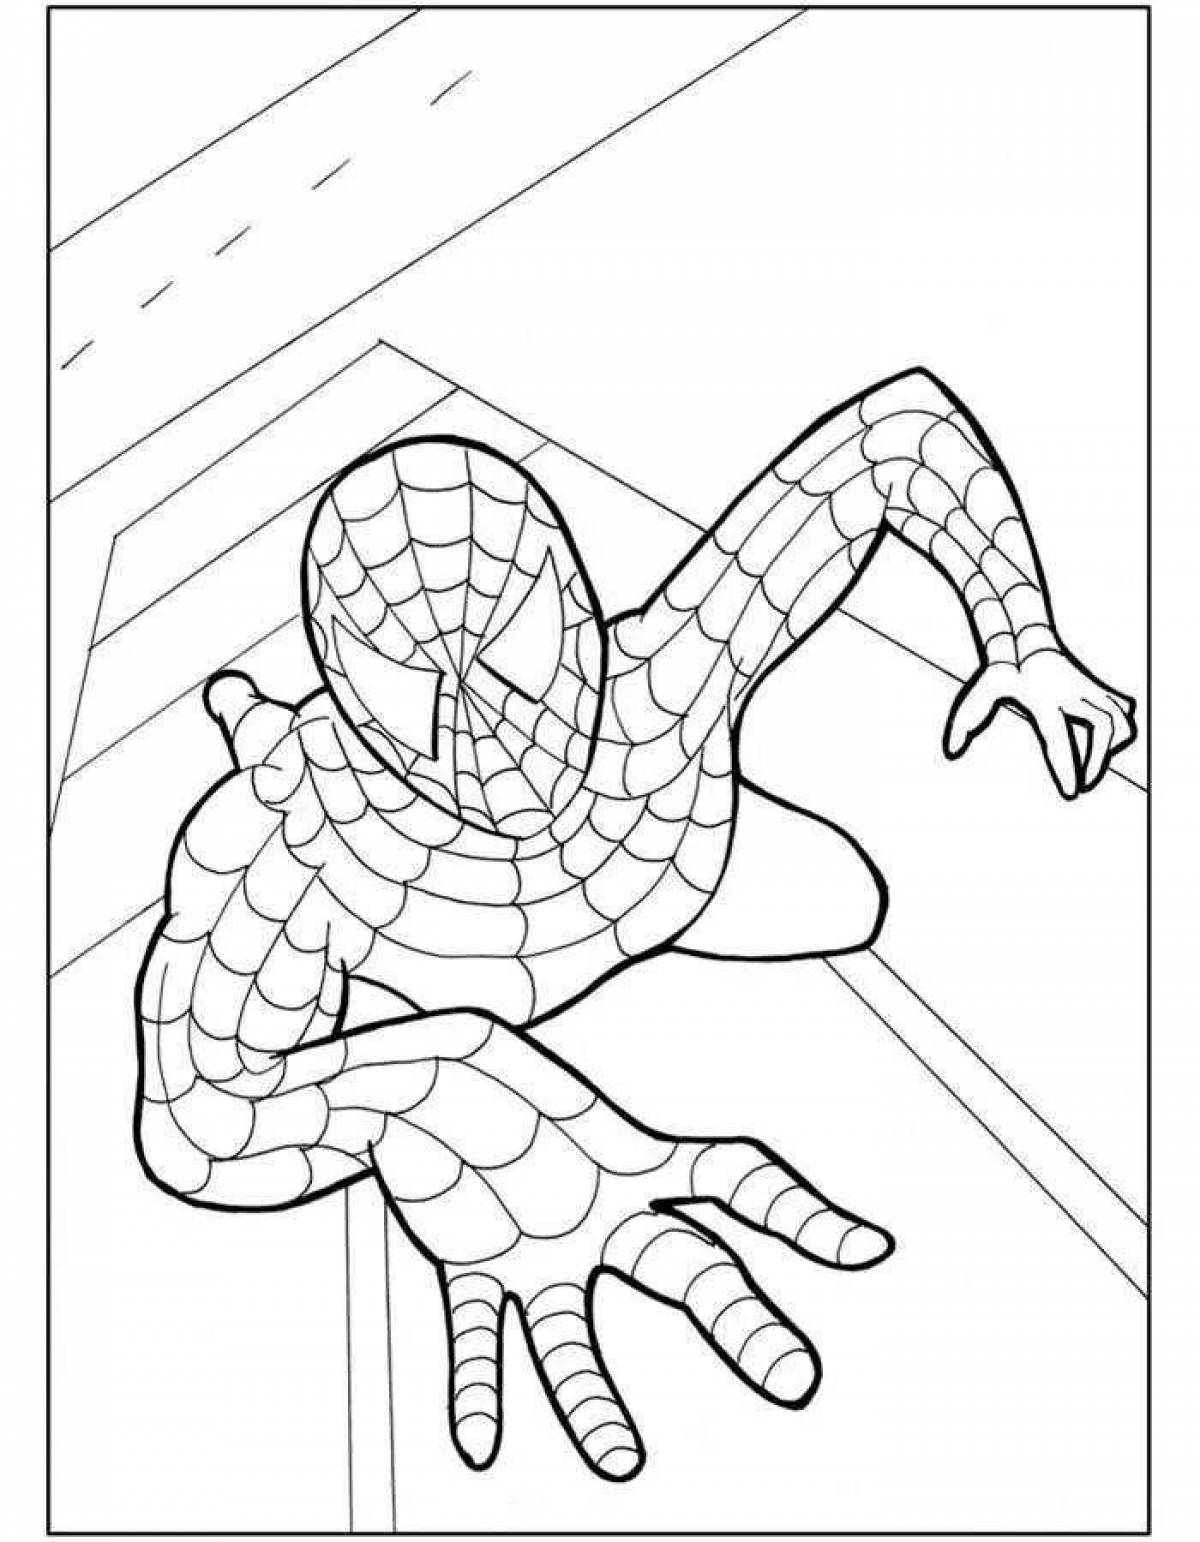 Spiderman coloring book for kids